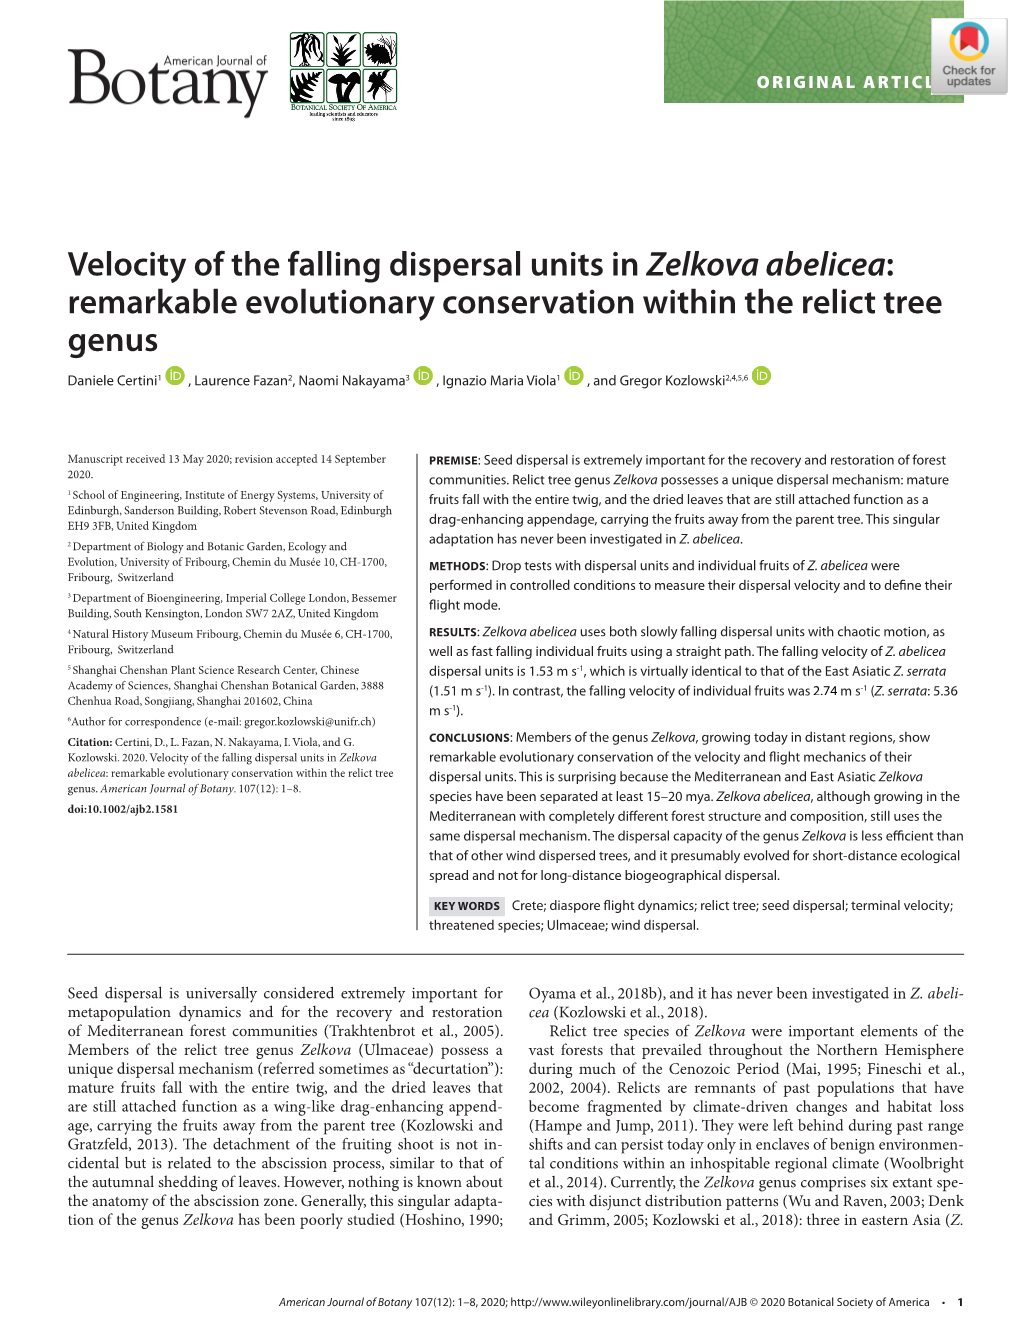 Velocity of the Falling Dispersal Units in Zelkova Abelicea: Remarkable Evolutionary Conservation Within the Relict Tree Genus